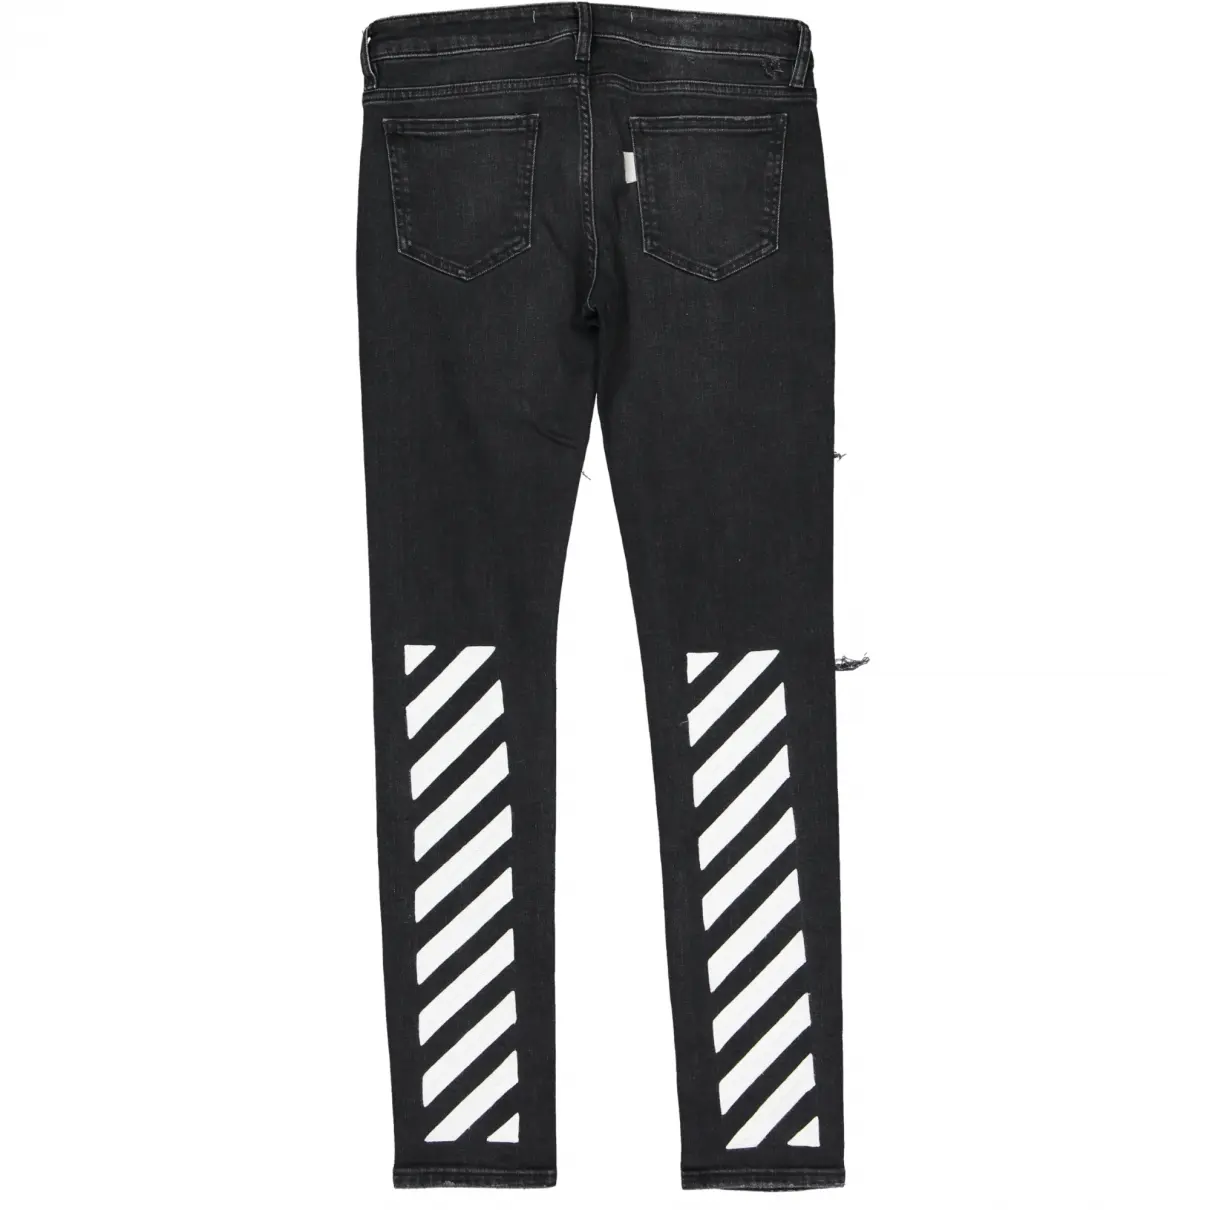 Off-White Slim jeans for sale